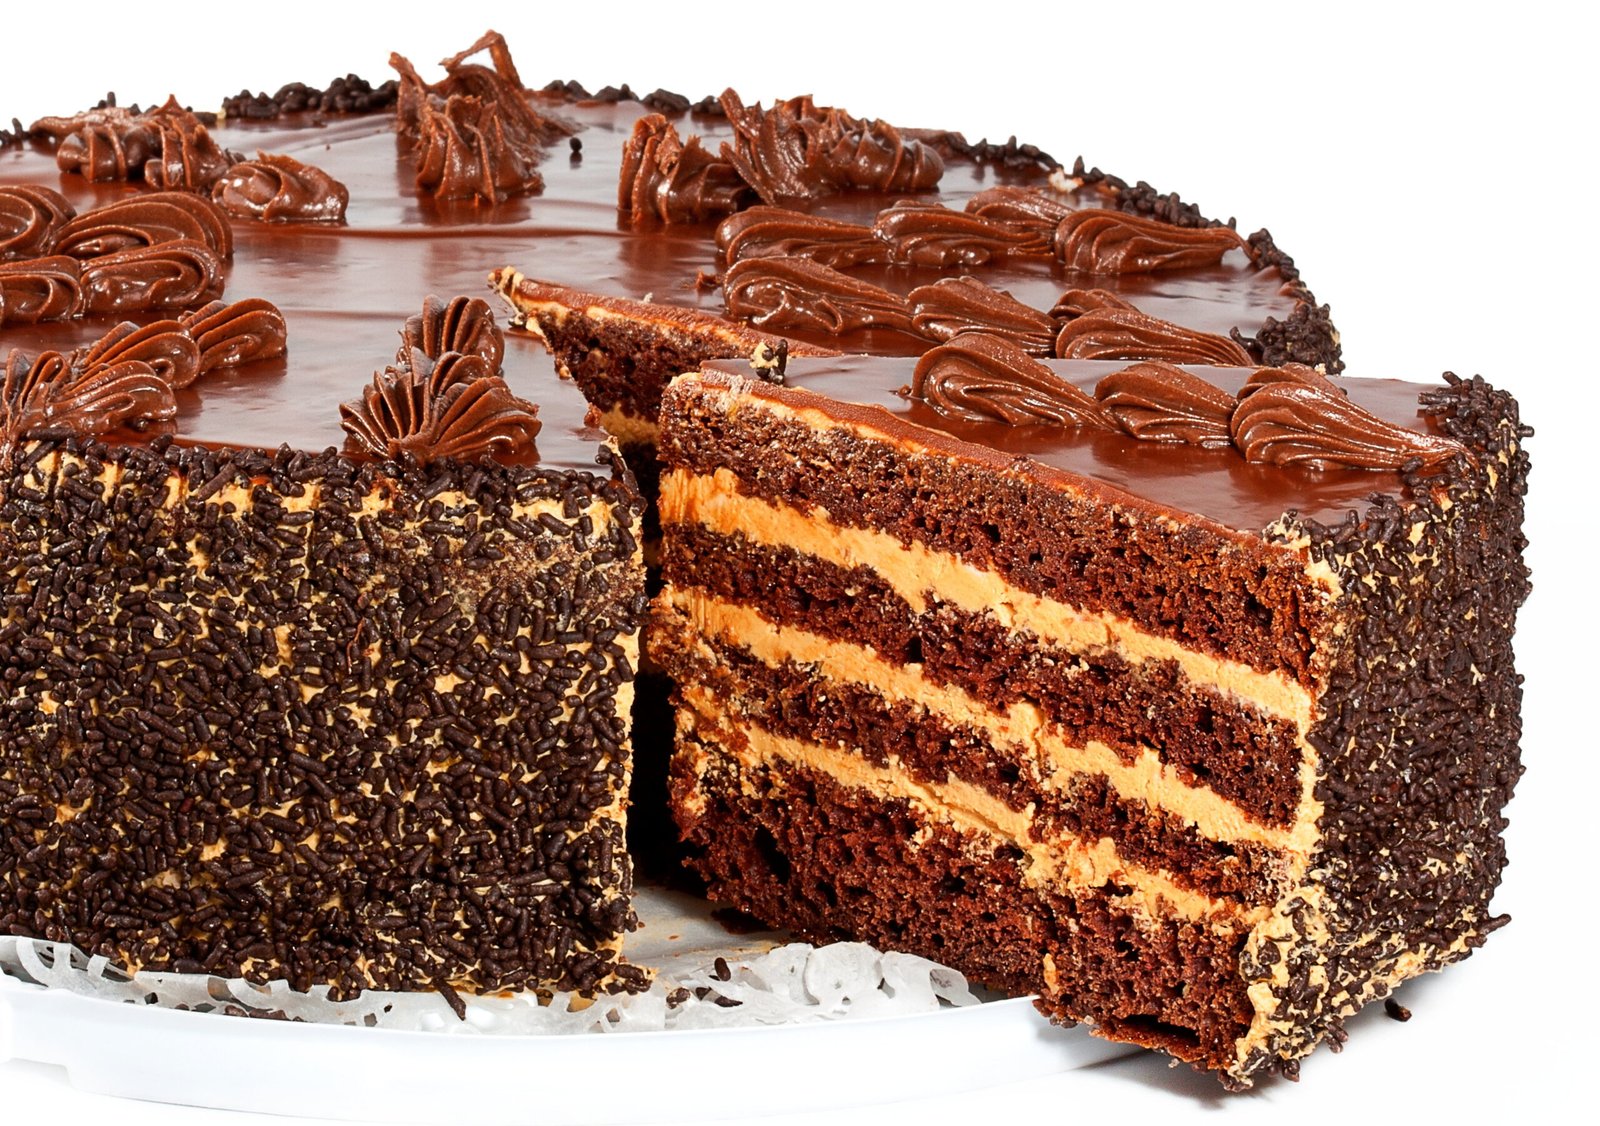 From Bakery to Your Doorstep: Why Cake Delivery is the Ultimate Convenience